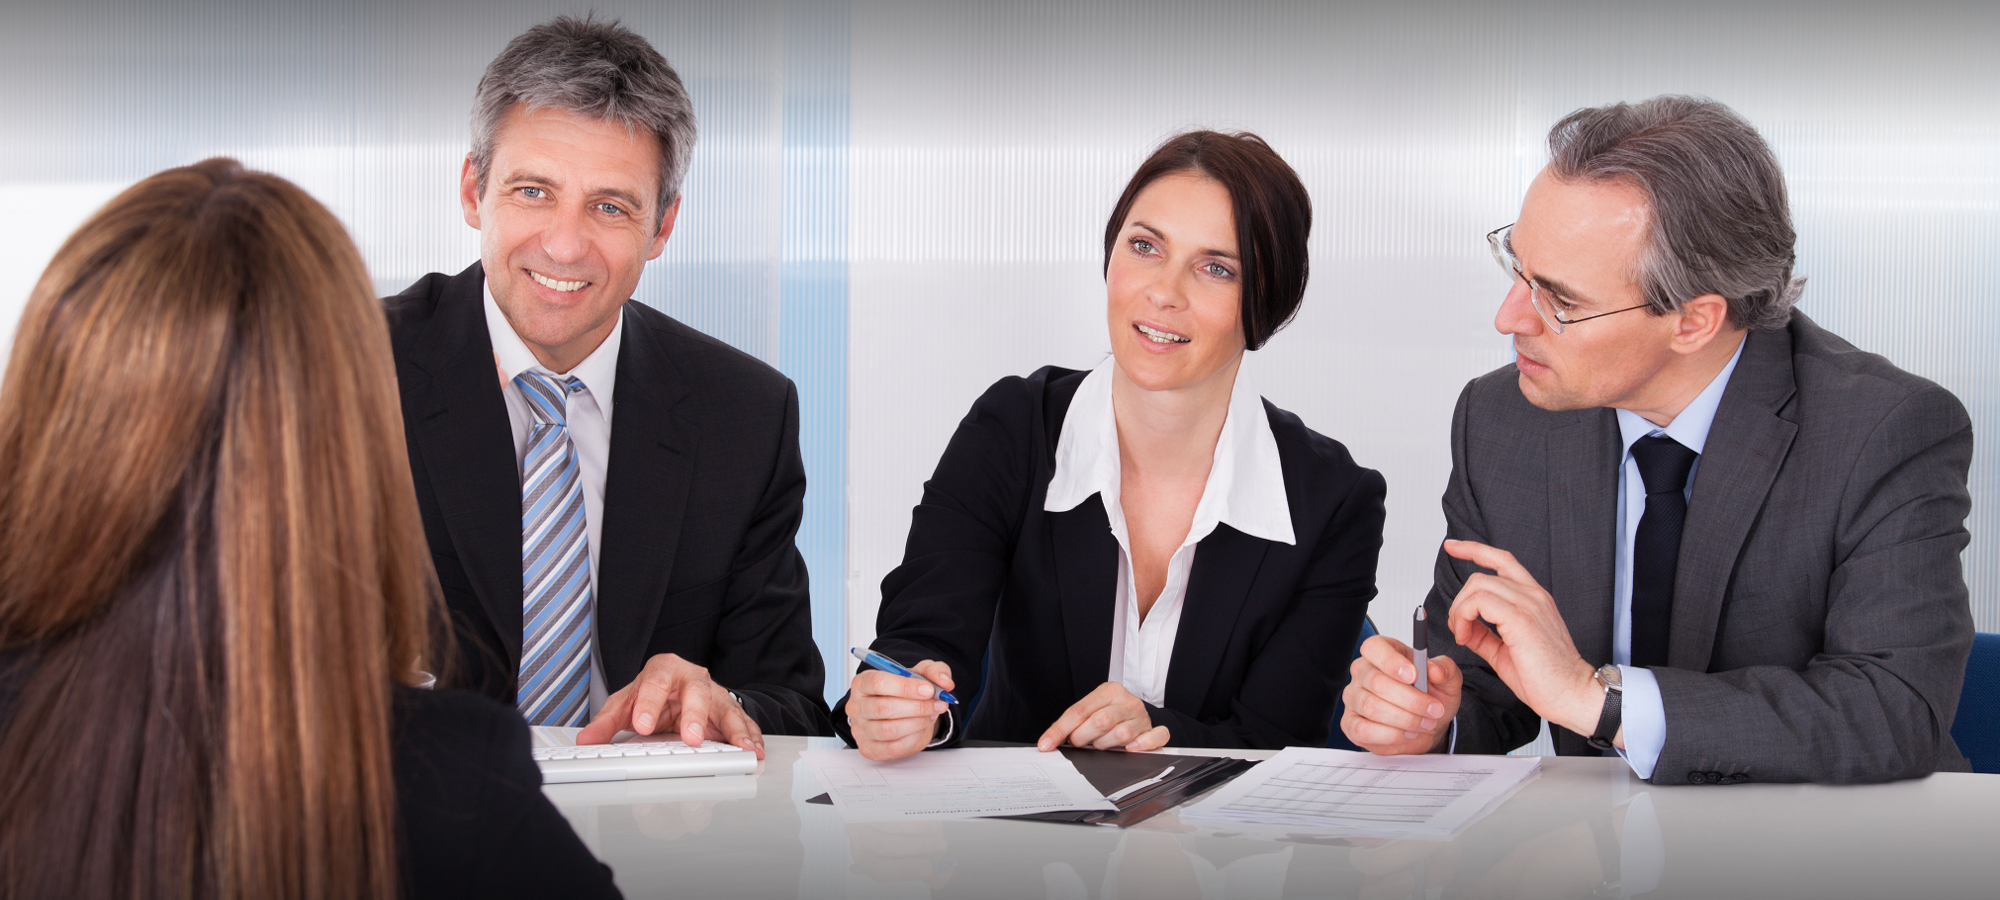 Group Of Businesspeople Interviewing Woman In Office